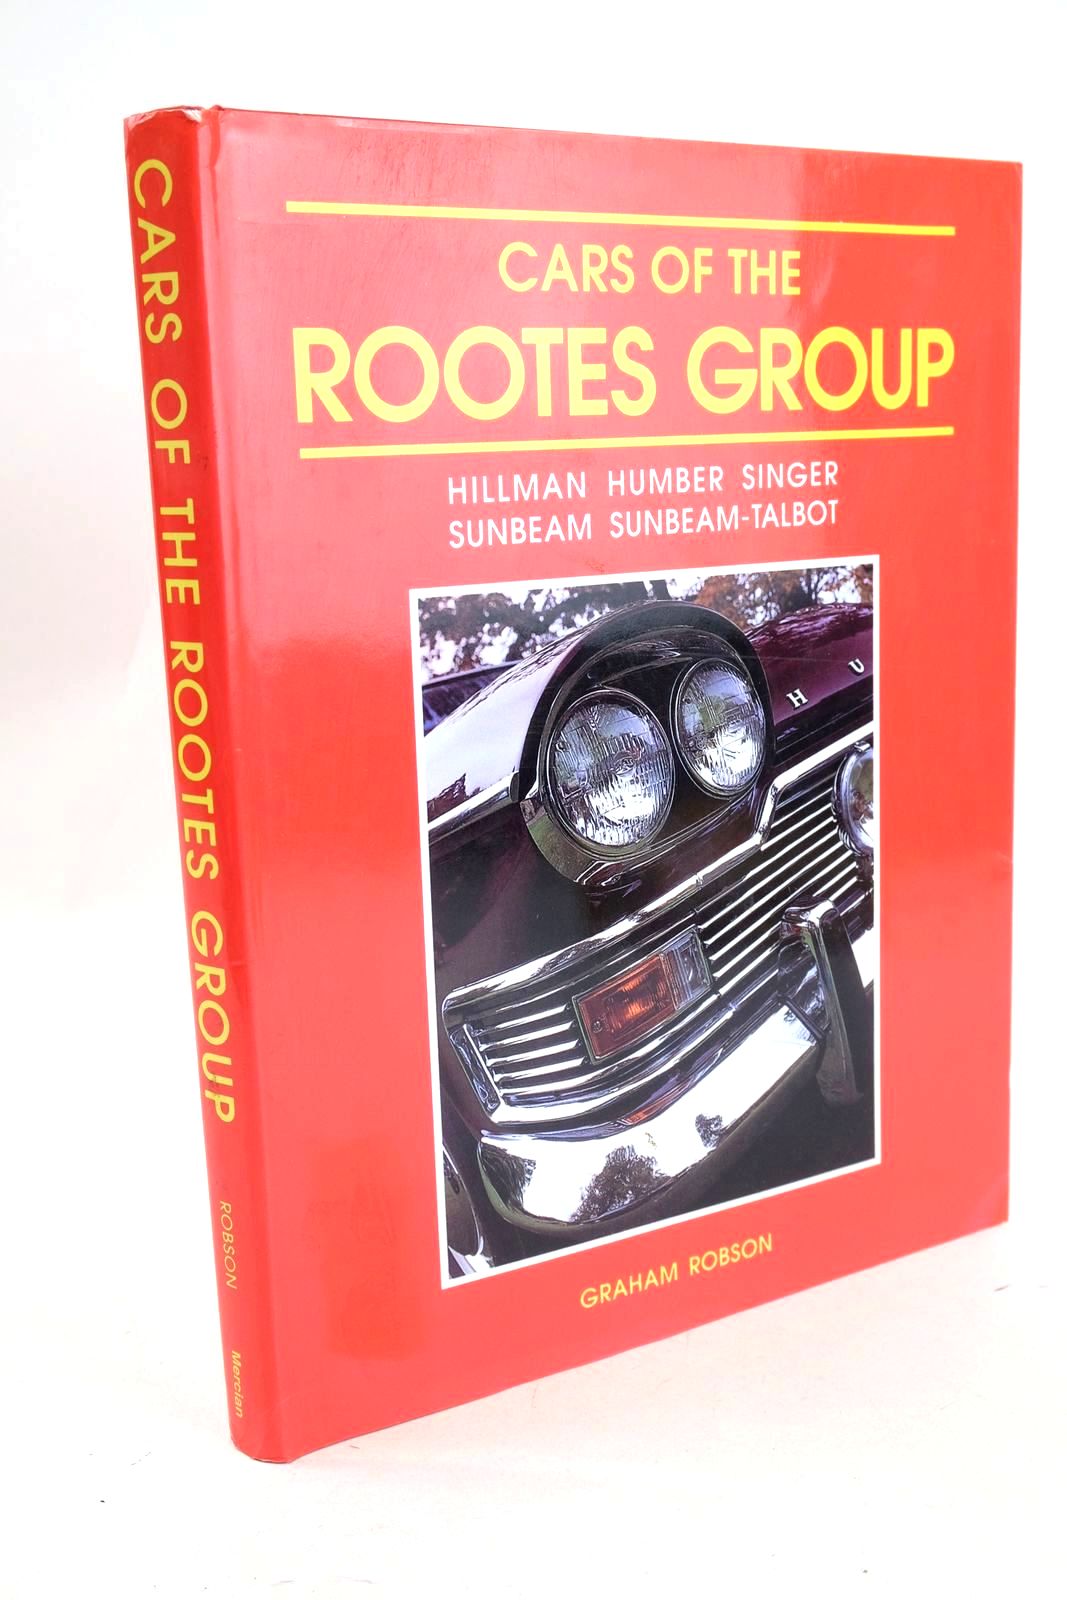 Photo of CARS OF THE ROOTES GROUP written by Robson, Graham published by Mercian Manuals Ltd (STOCK CODE: 1327211)  for sale by Stella & Rose's Books